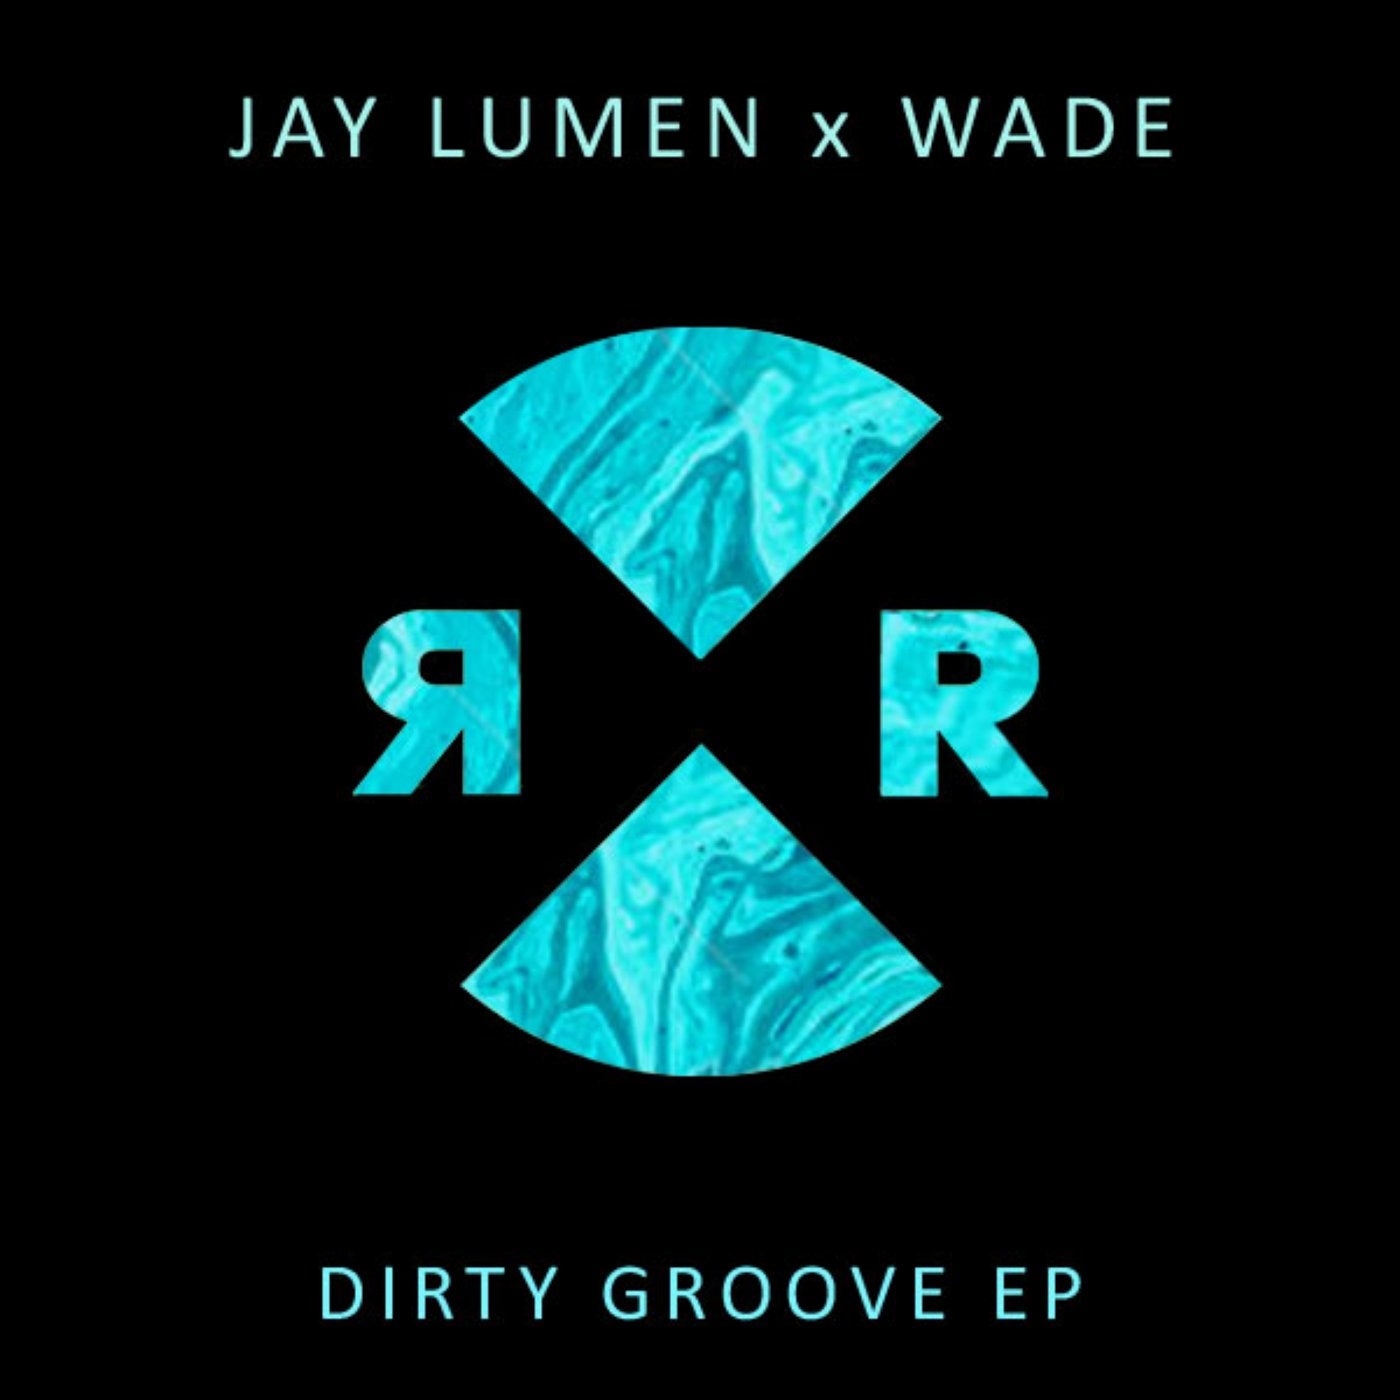 Dirty Groove EP